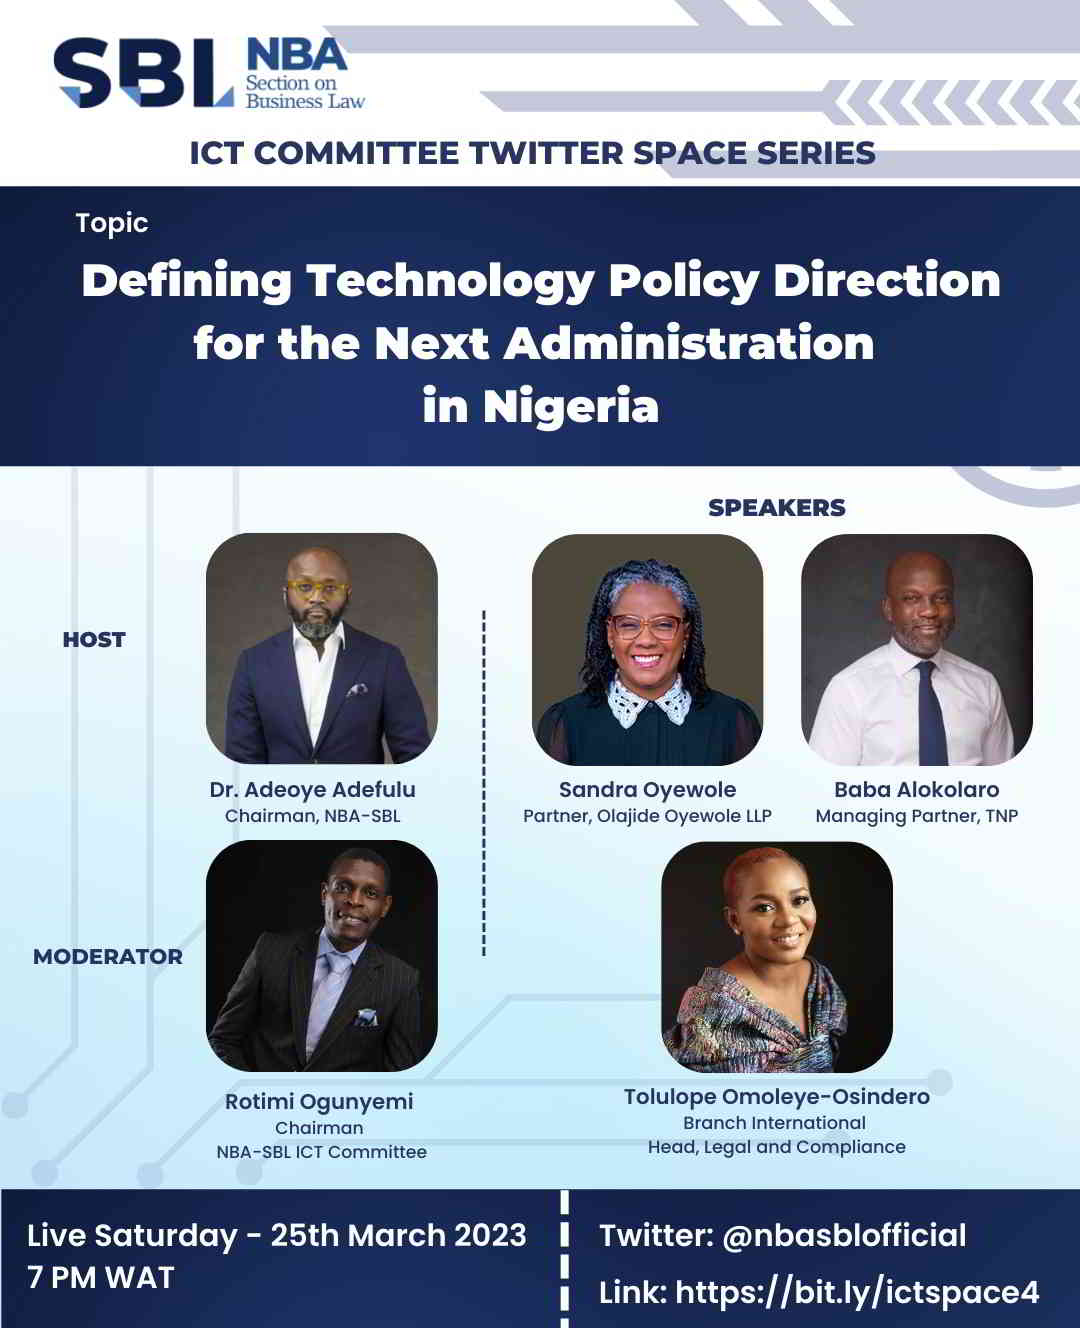 NBA-SBL ORGANISES WEBINAR ON DEFINING TECHNOLOGY POLICY DIRECTION FOR THE NEXT ADMINISTRATION IN NIGERIA